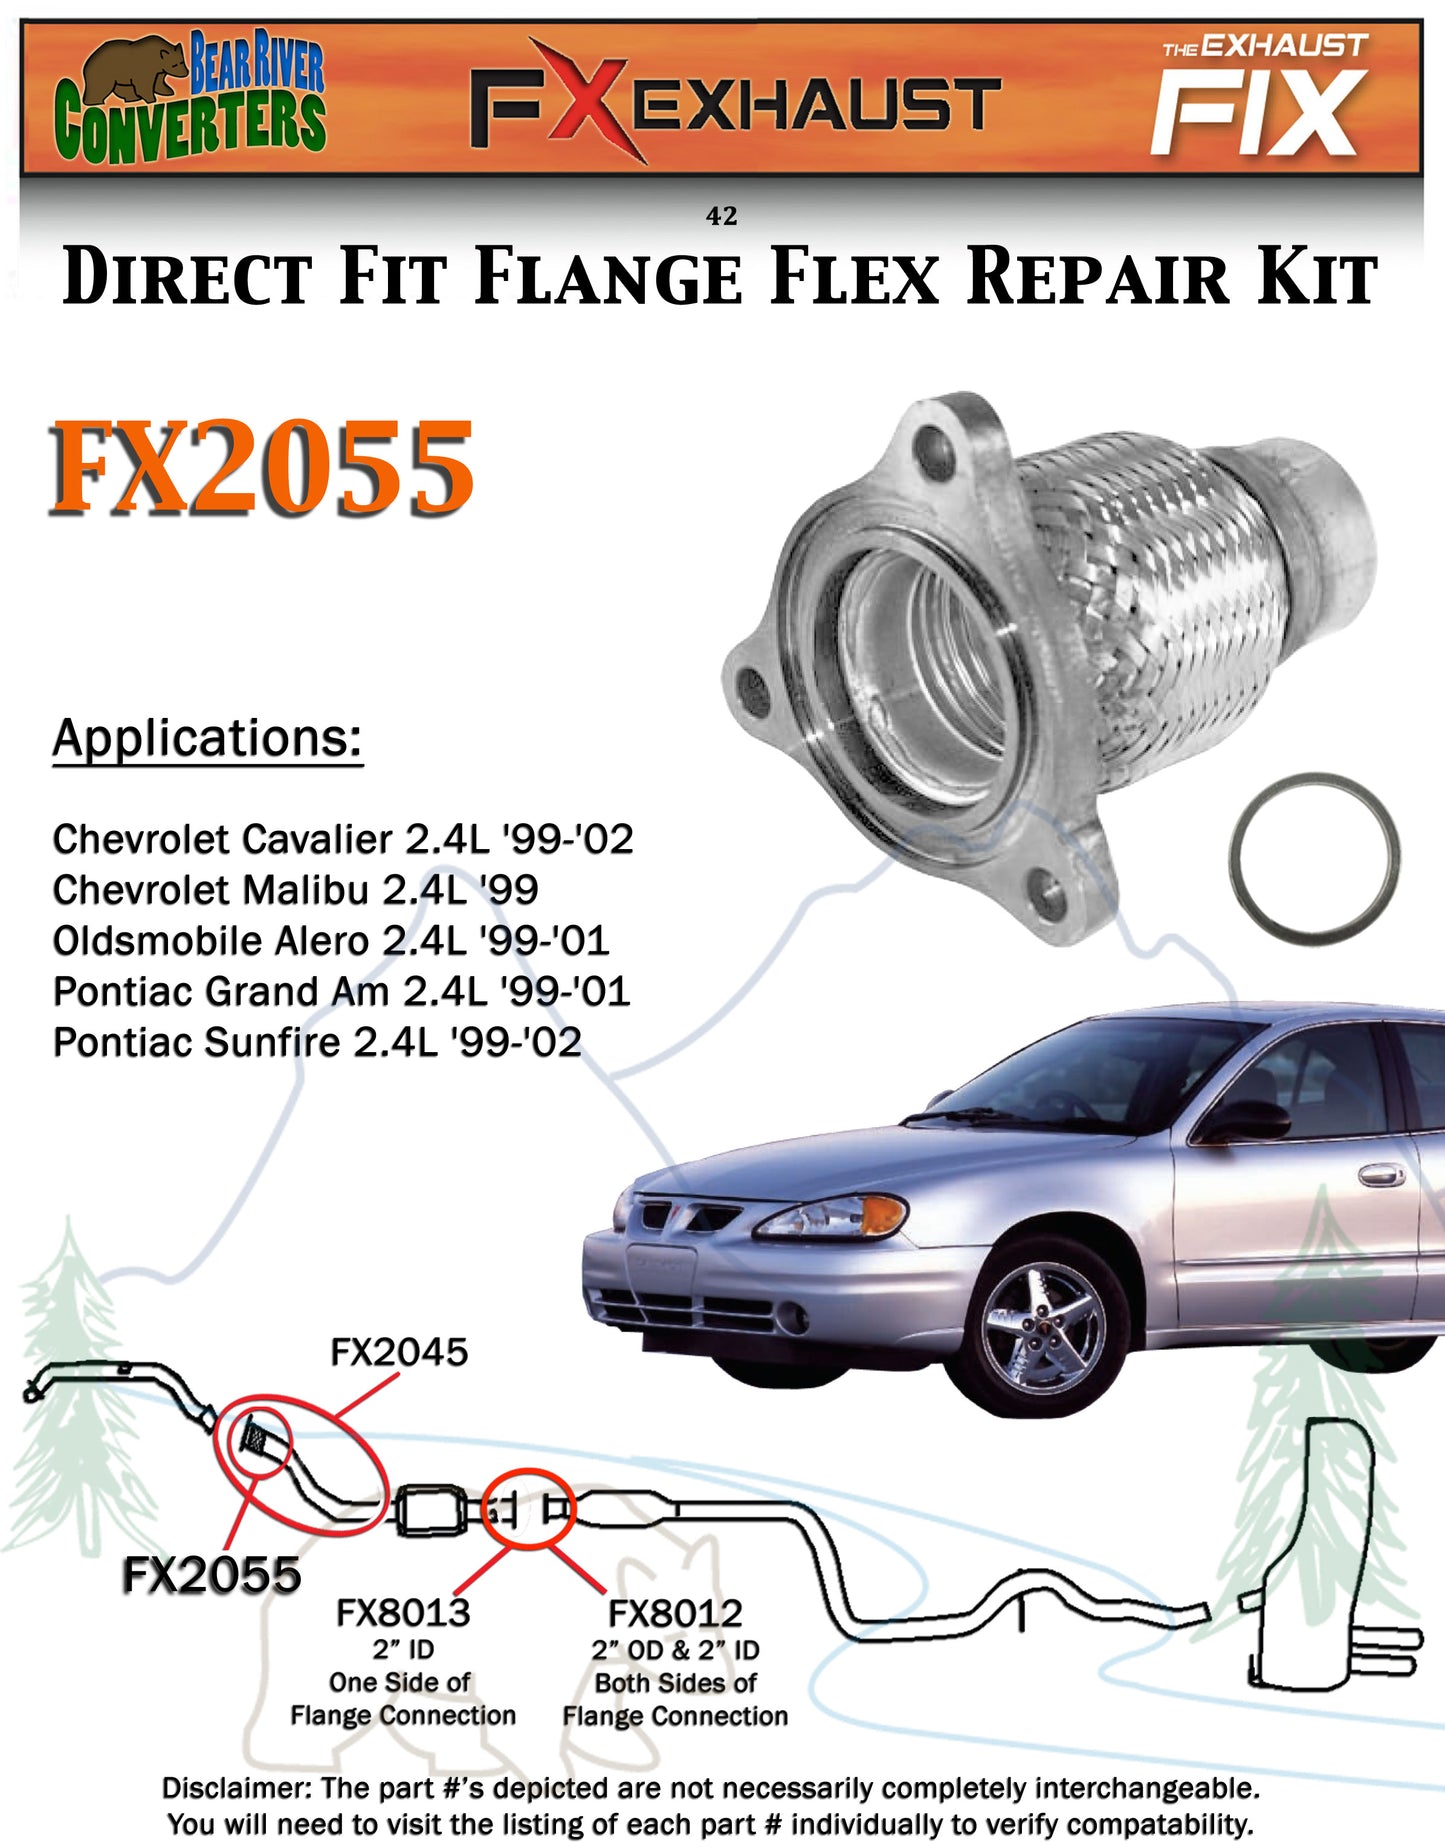 FX2055 Semi Direct Fit Exhaust Flange Repair Flex Pipe Replacement Kit With Gasket